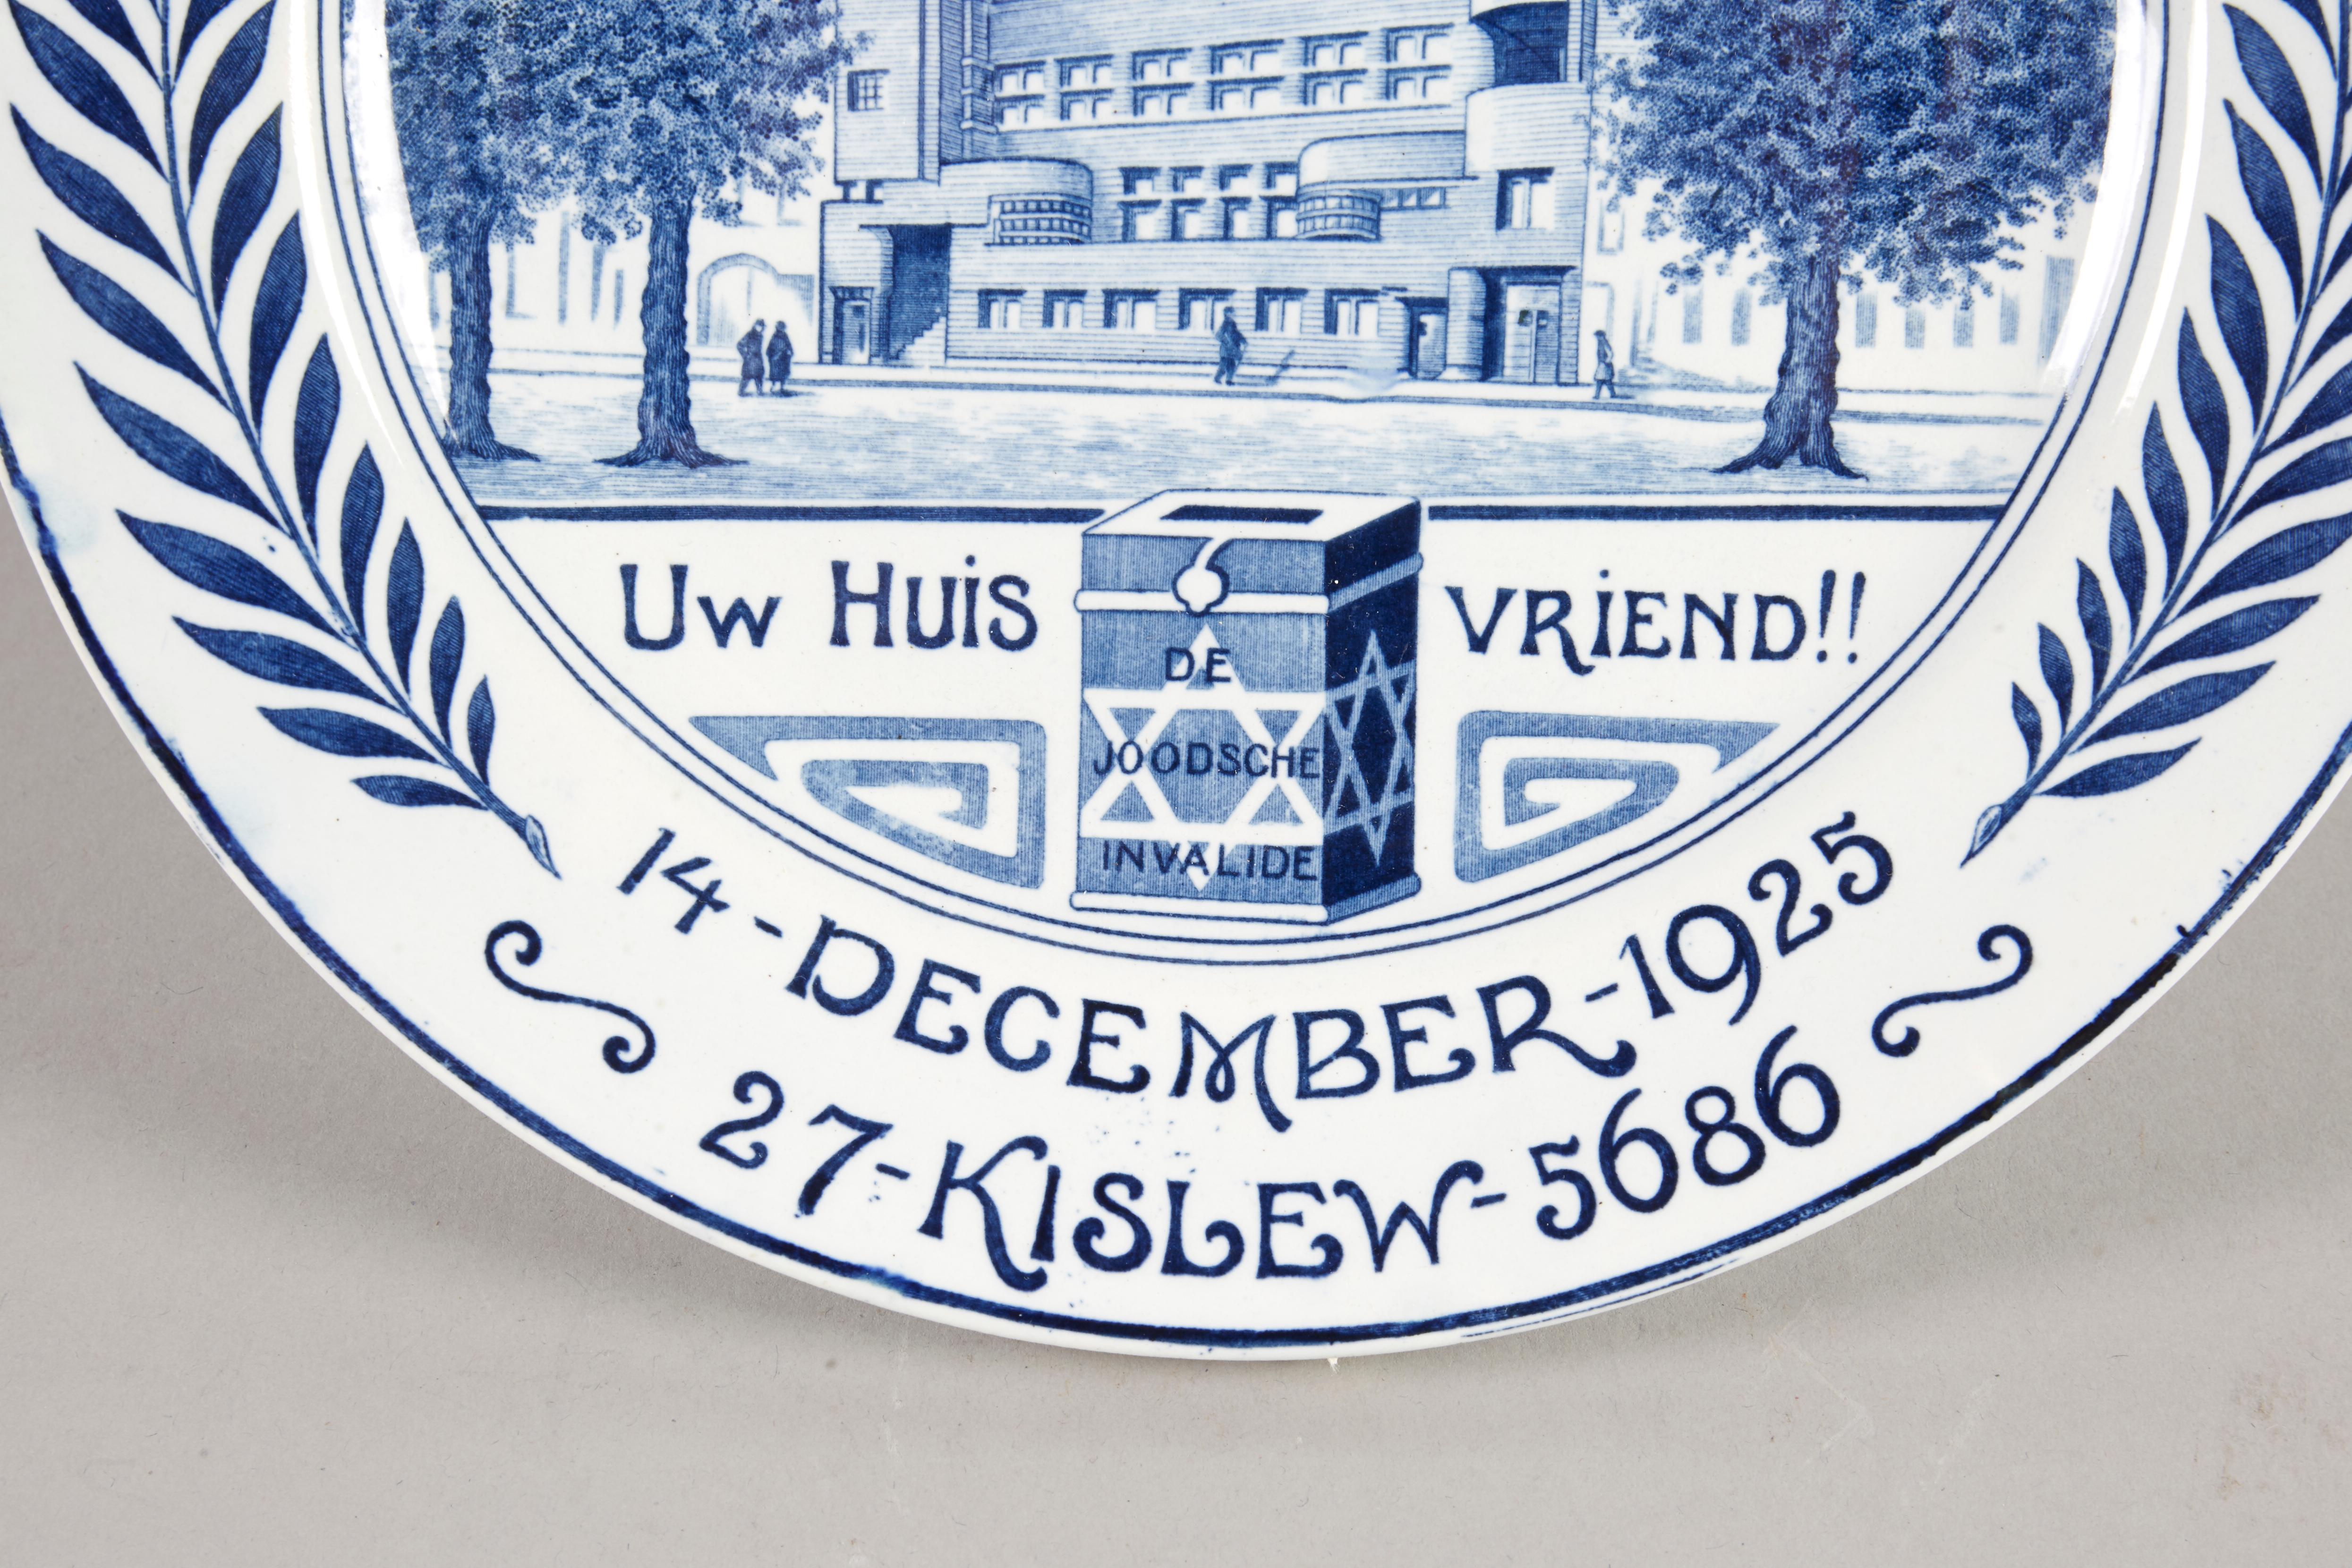 Ceramic commemorative plate, The Netherlands, Amsterdam, 1925
Blue and white ceramic plate made in honor of a new building for the Jewish hospital of the Jewish-Dutch charity fund established in Amsterdam in 1911 (De Joodsche Invalide). Blue